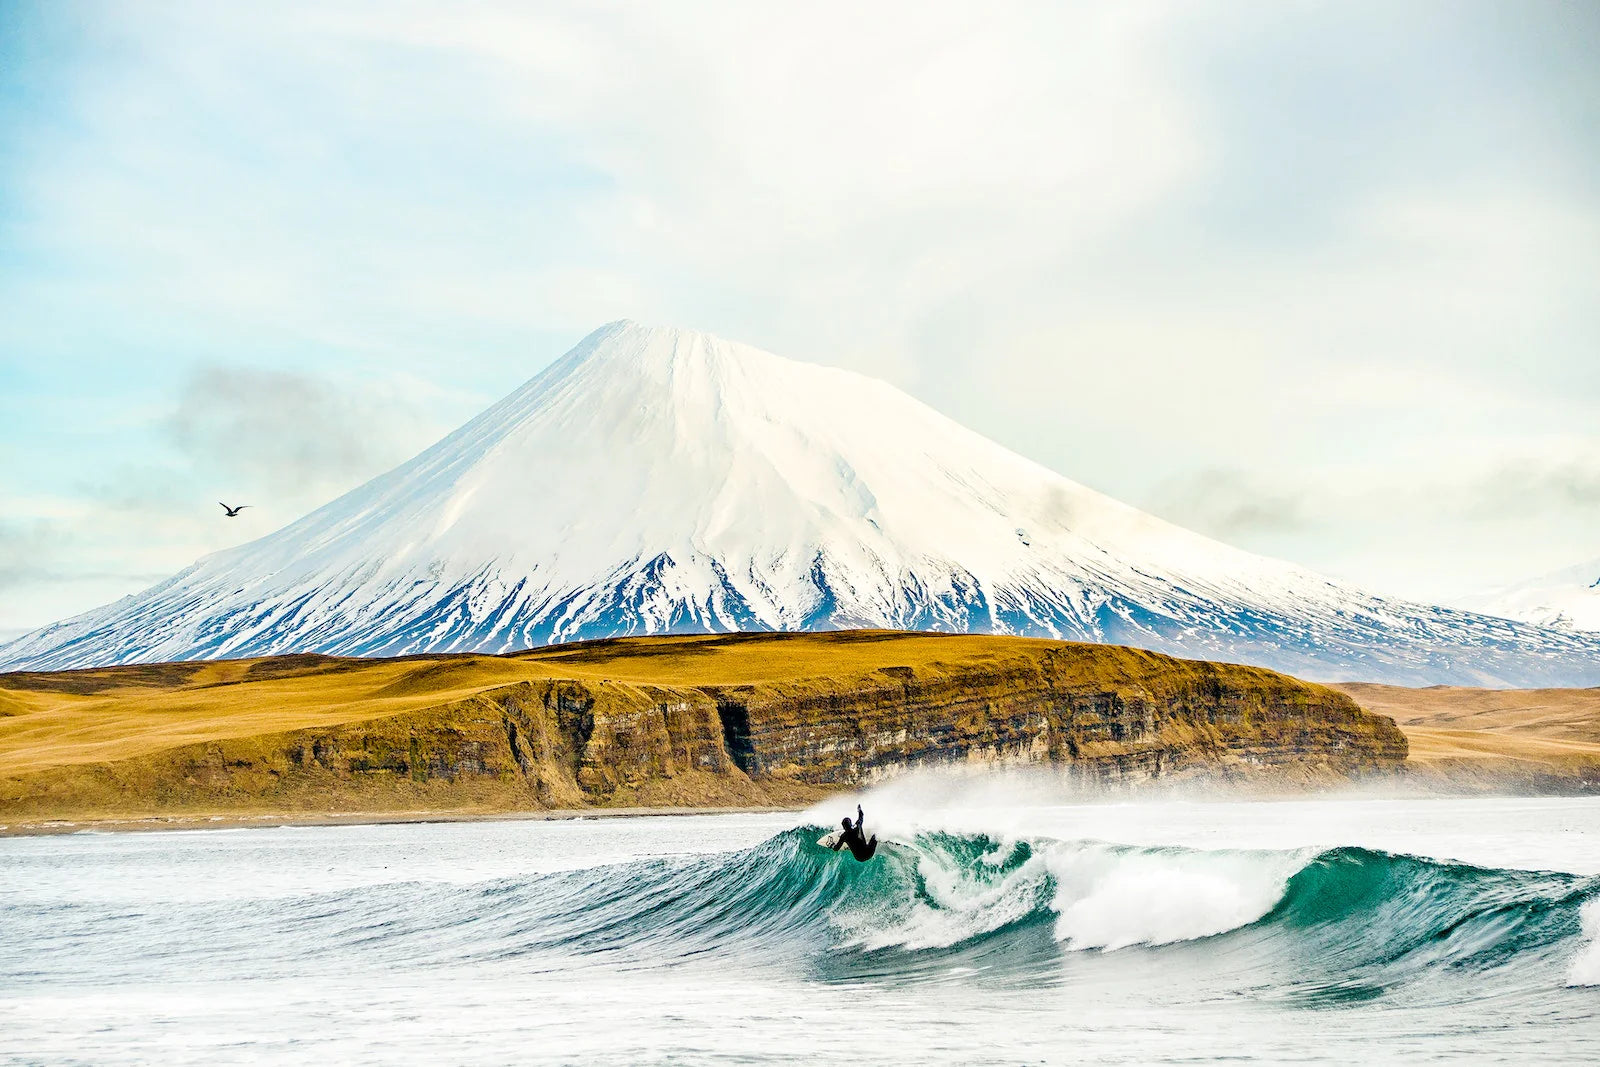 The Oceans by Chris Burkard